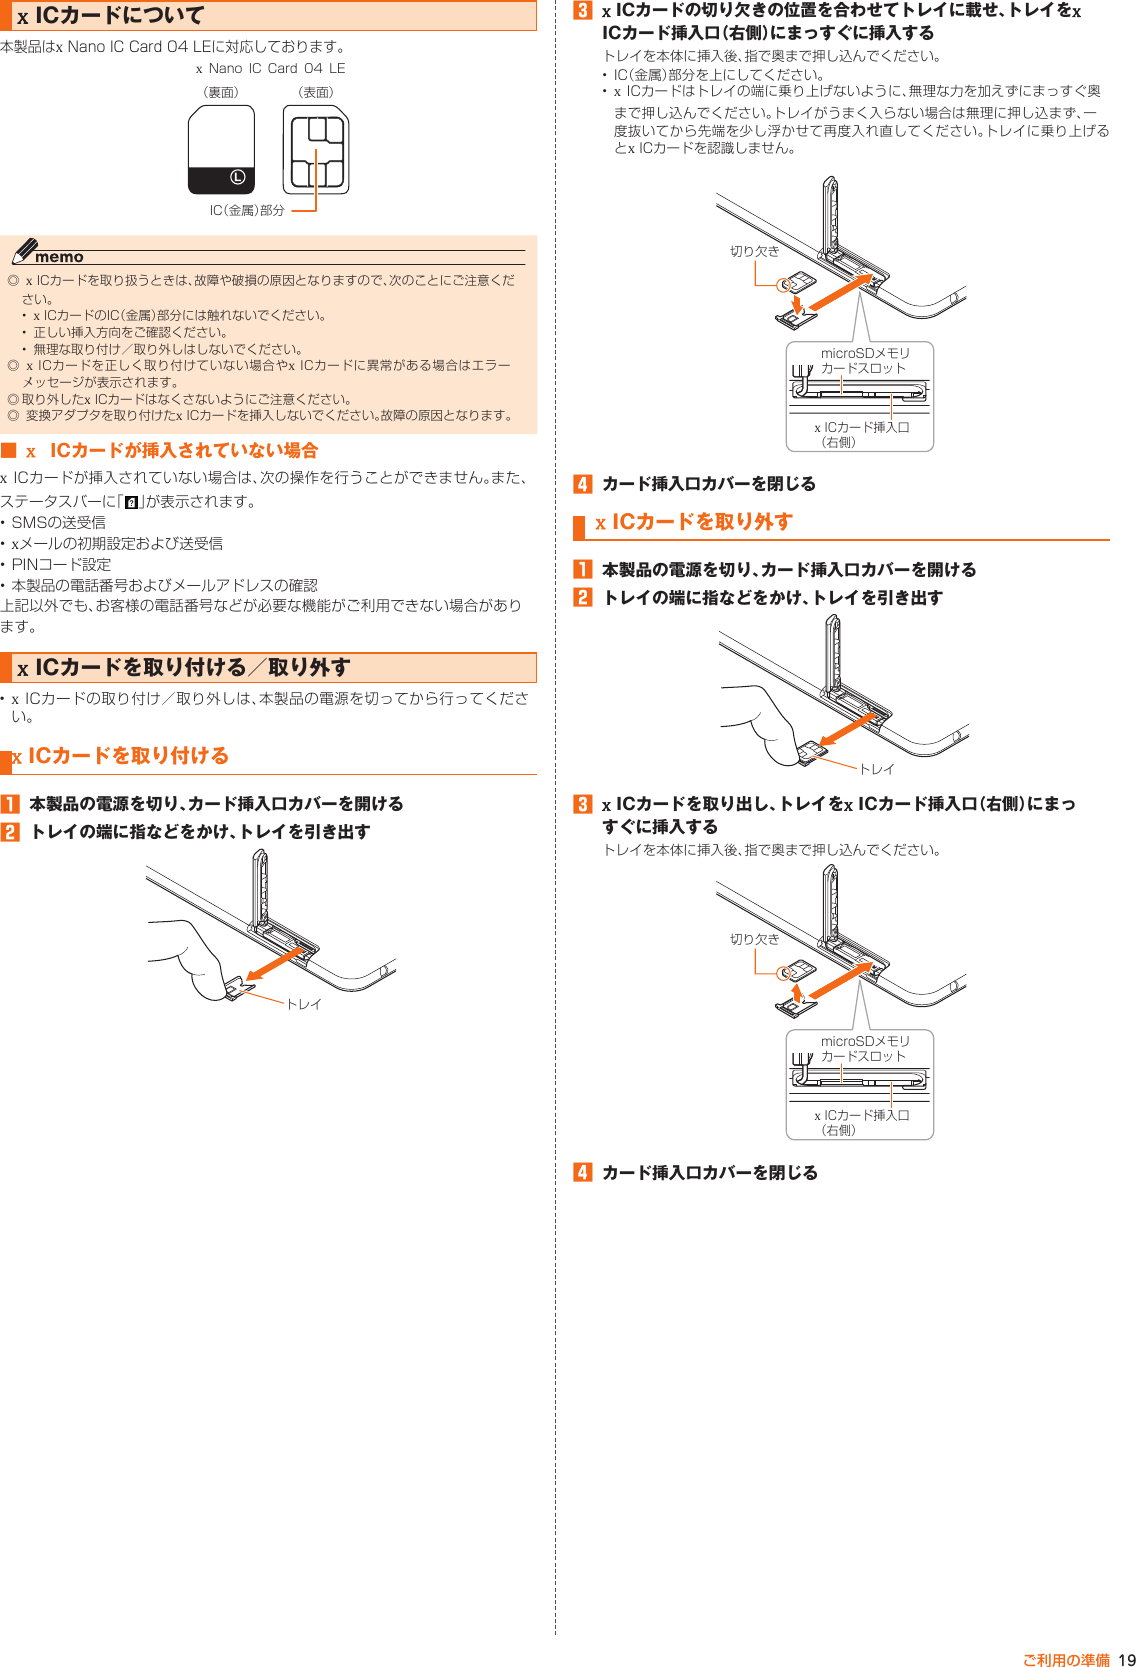 Page 18 of Kyocera FA51 Tablet User Manual part 2